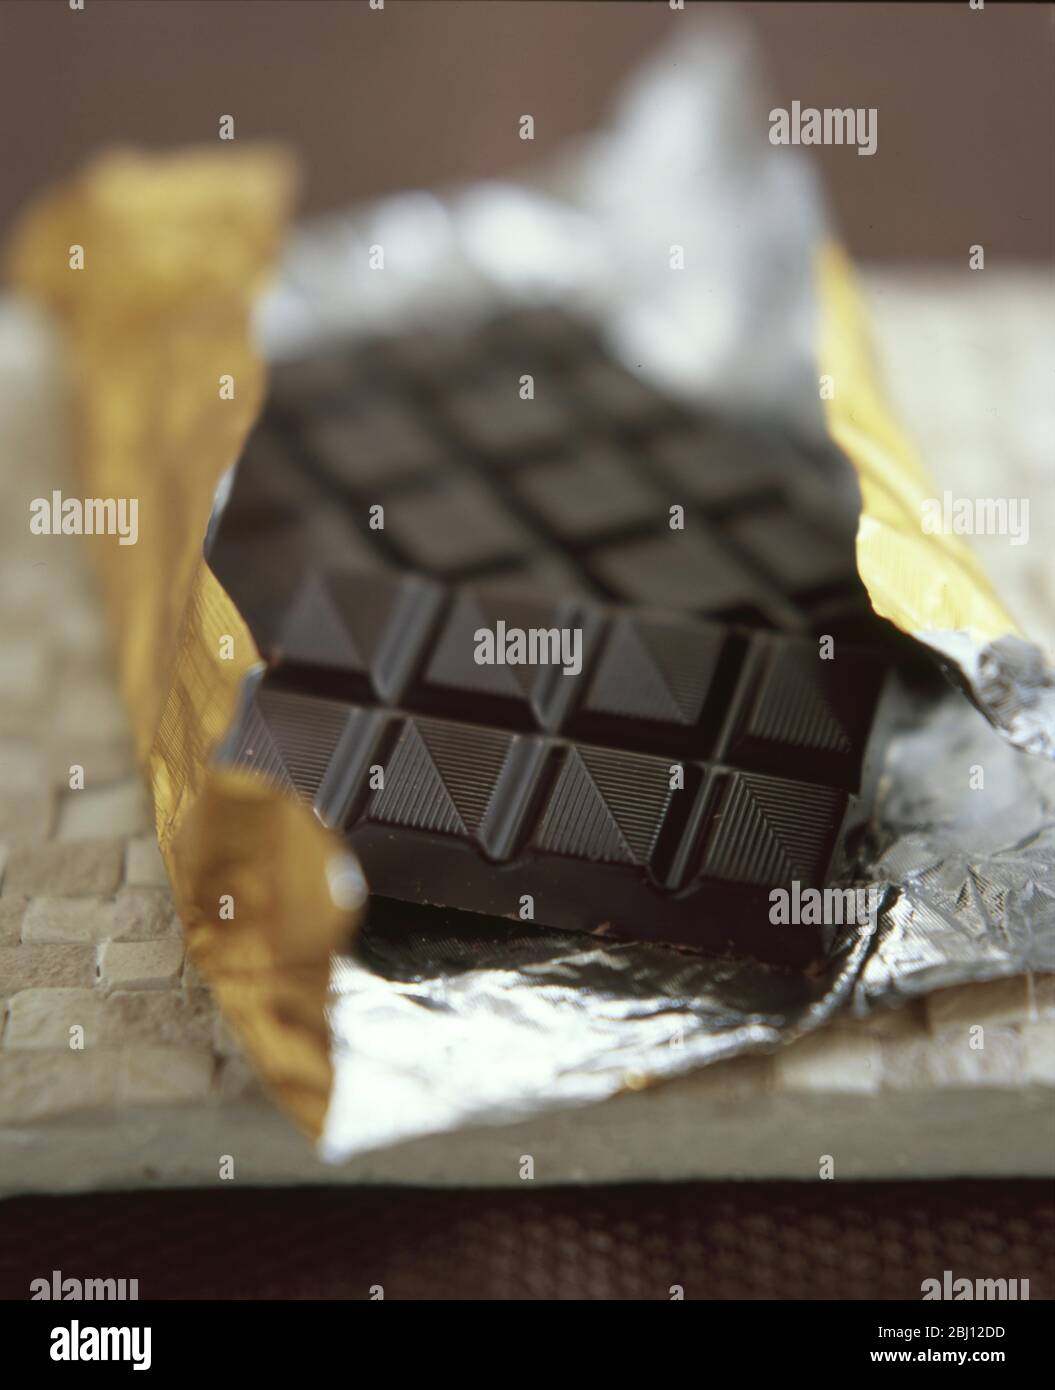 Dark chocolate bar opened and sitting in foil wrapping - Stock Photo